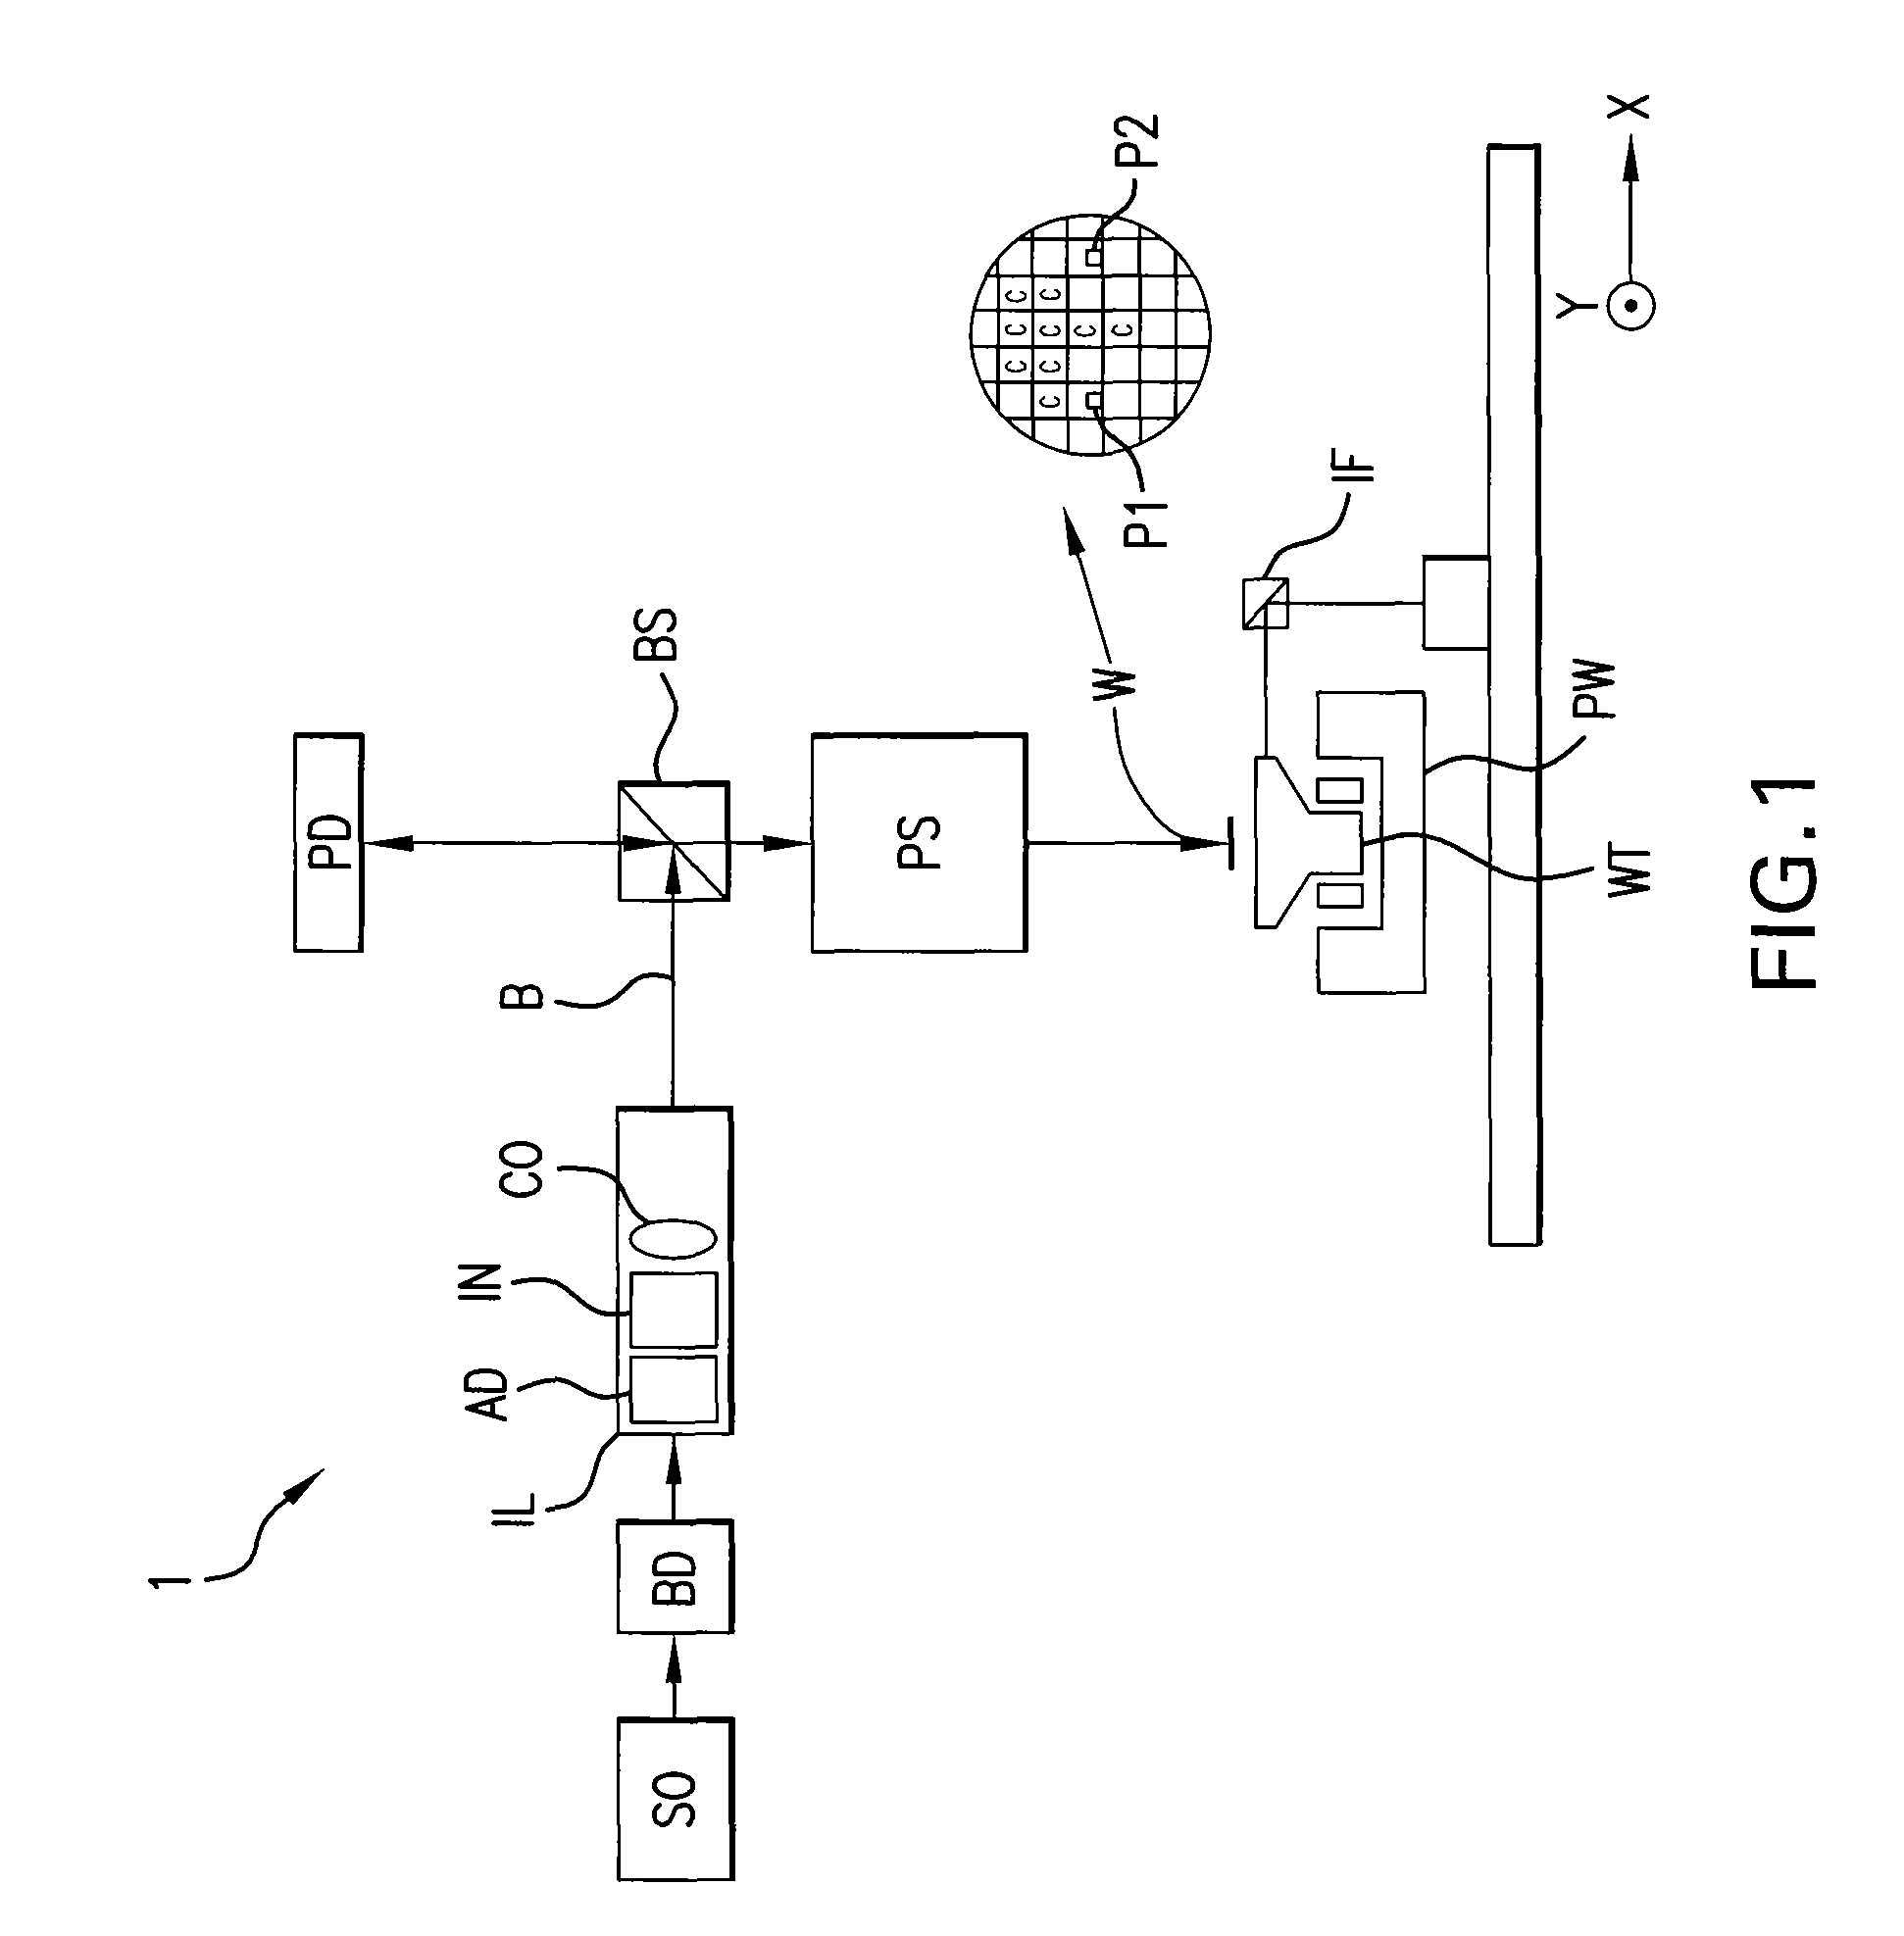 Synchronizing timing of multiple physically or logically separated system nodes